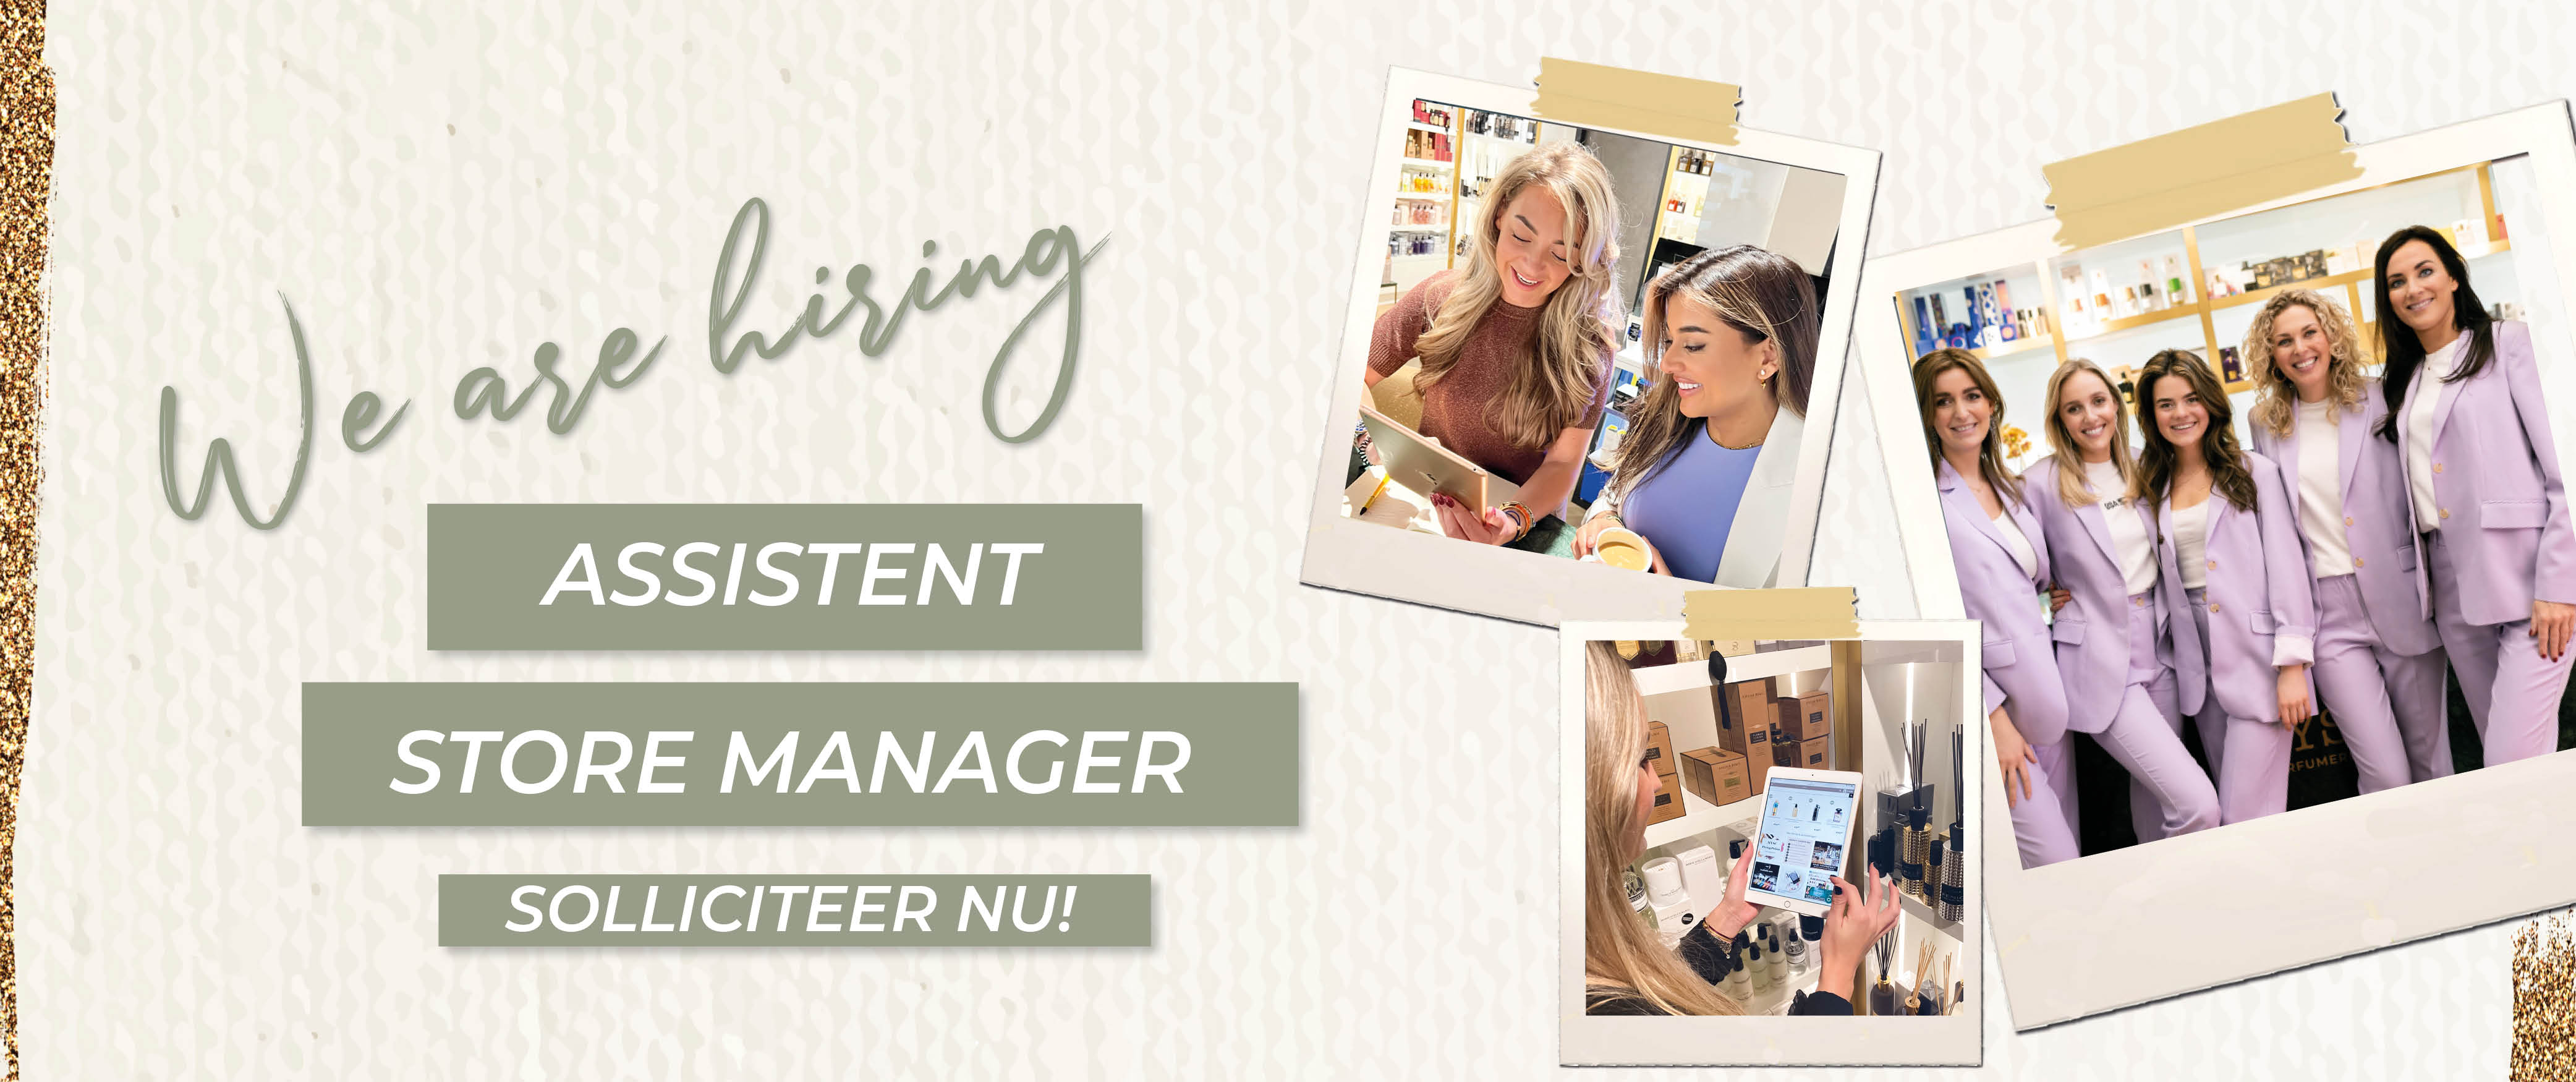 we are hiring  -  Assistent store manger